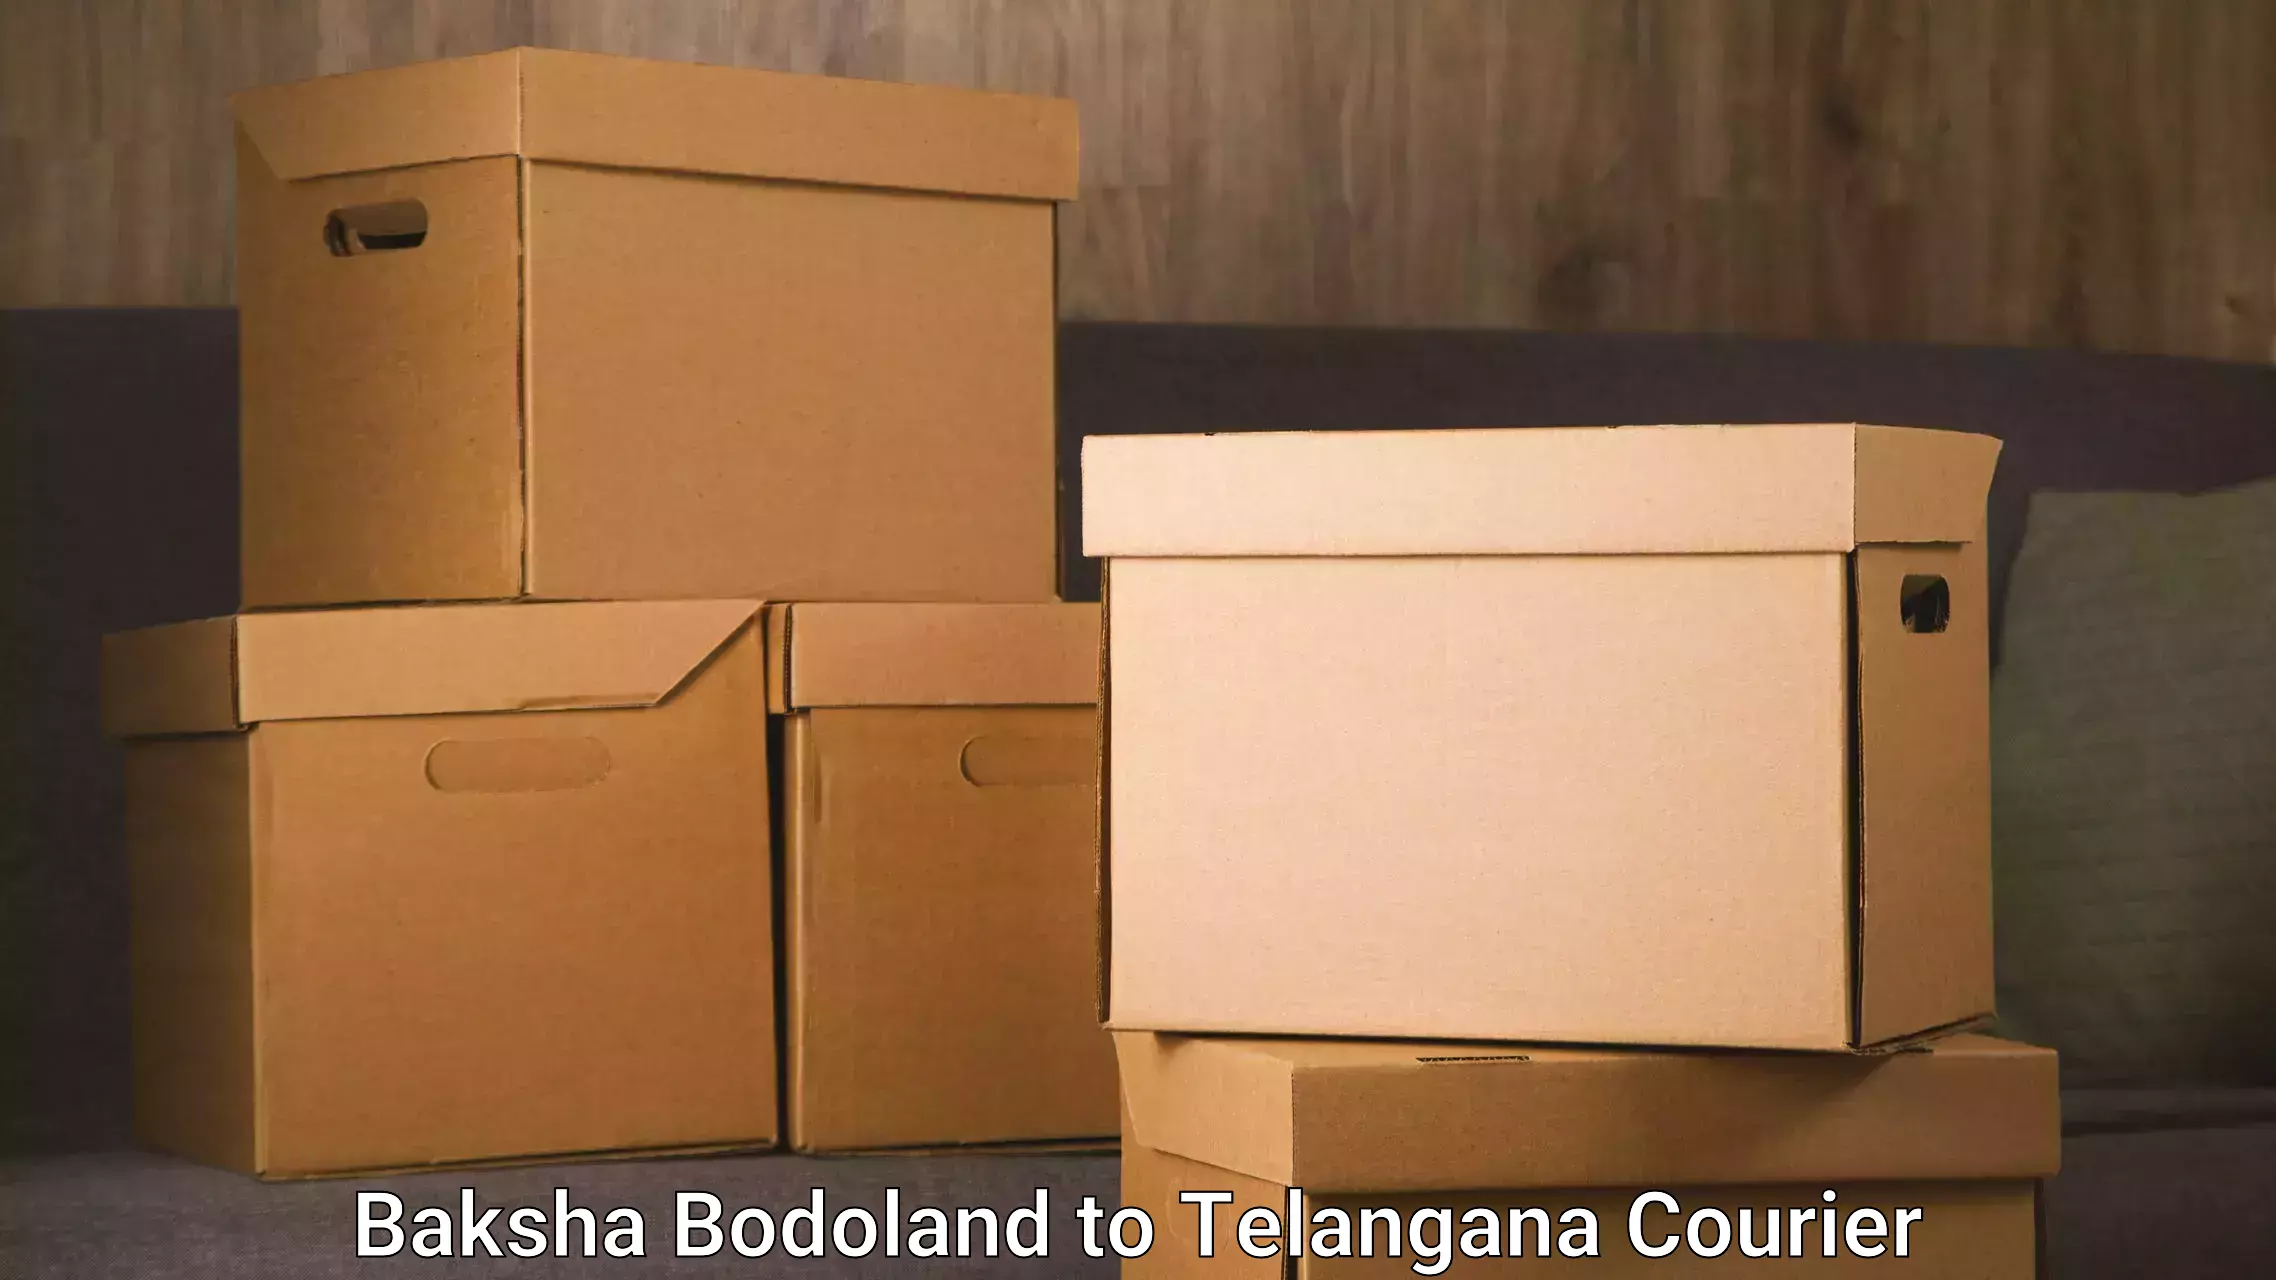 Postal and courier services in Baksha Bodoland to Jainad